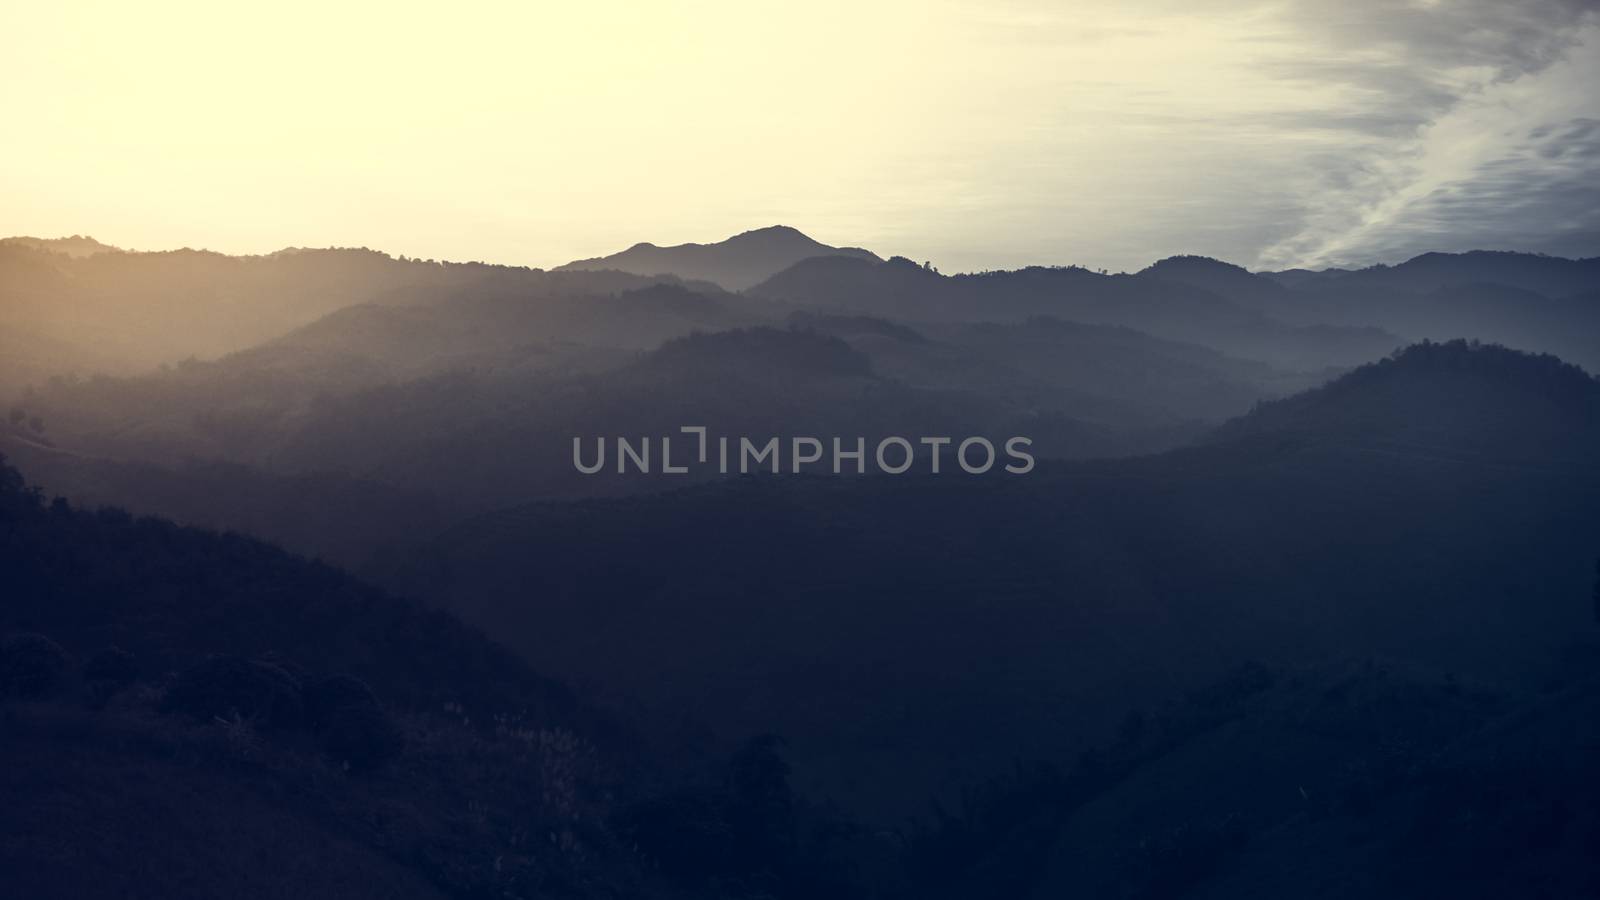 Landscape of forest mountains among mist on sunset